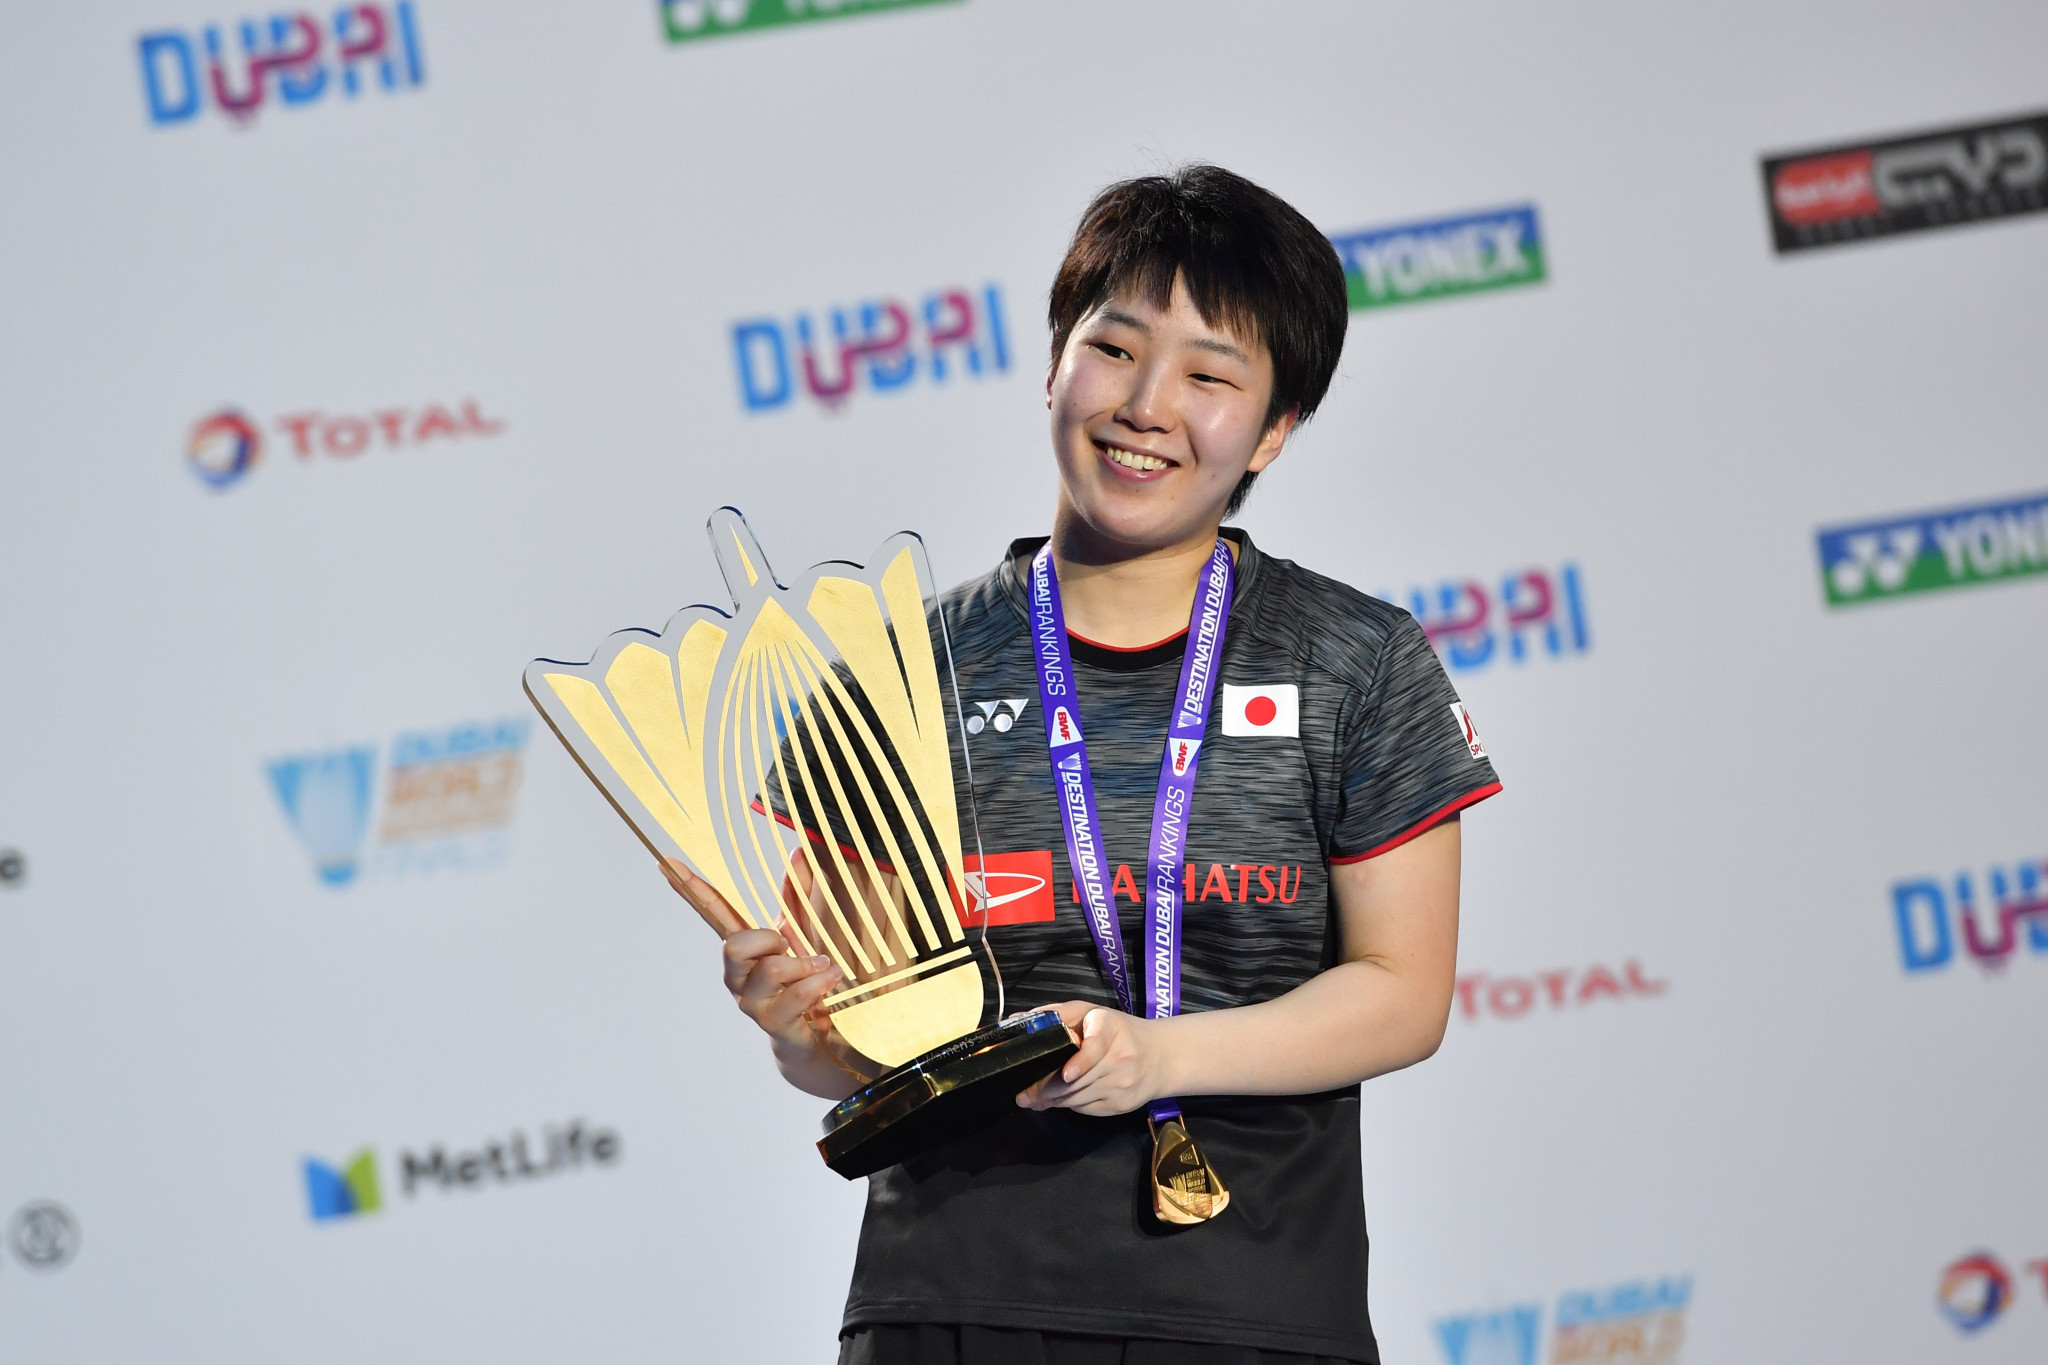 Akane Yamaguch produced an amazing comeback to take the BWF Super Series Finals women's singles title ©Getty Images